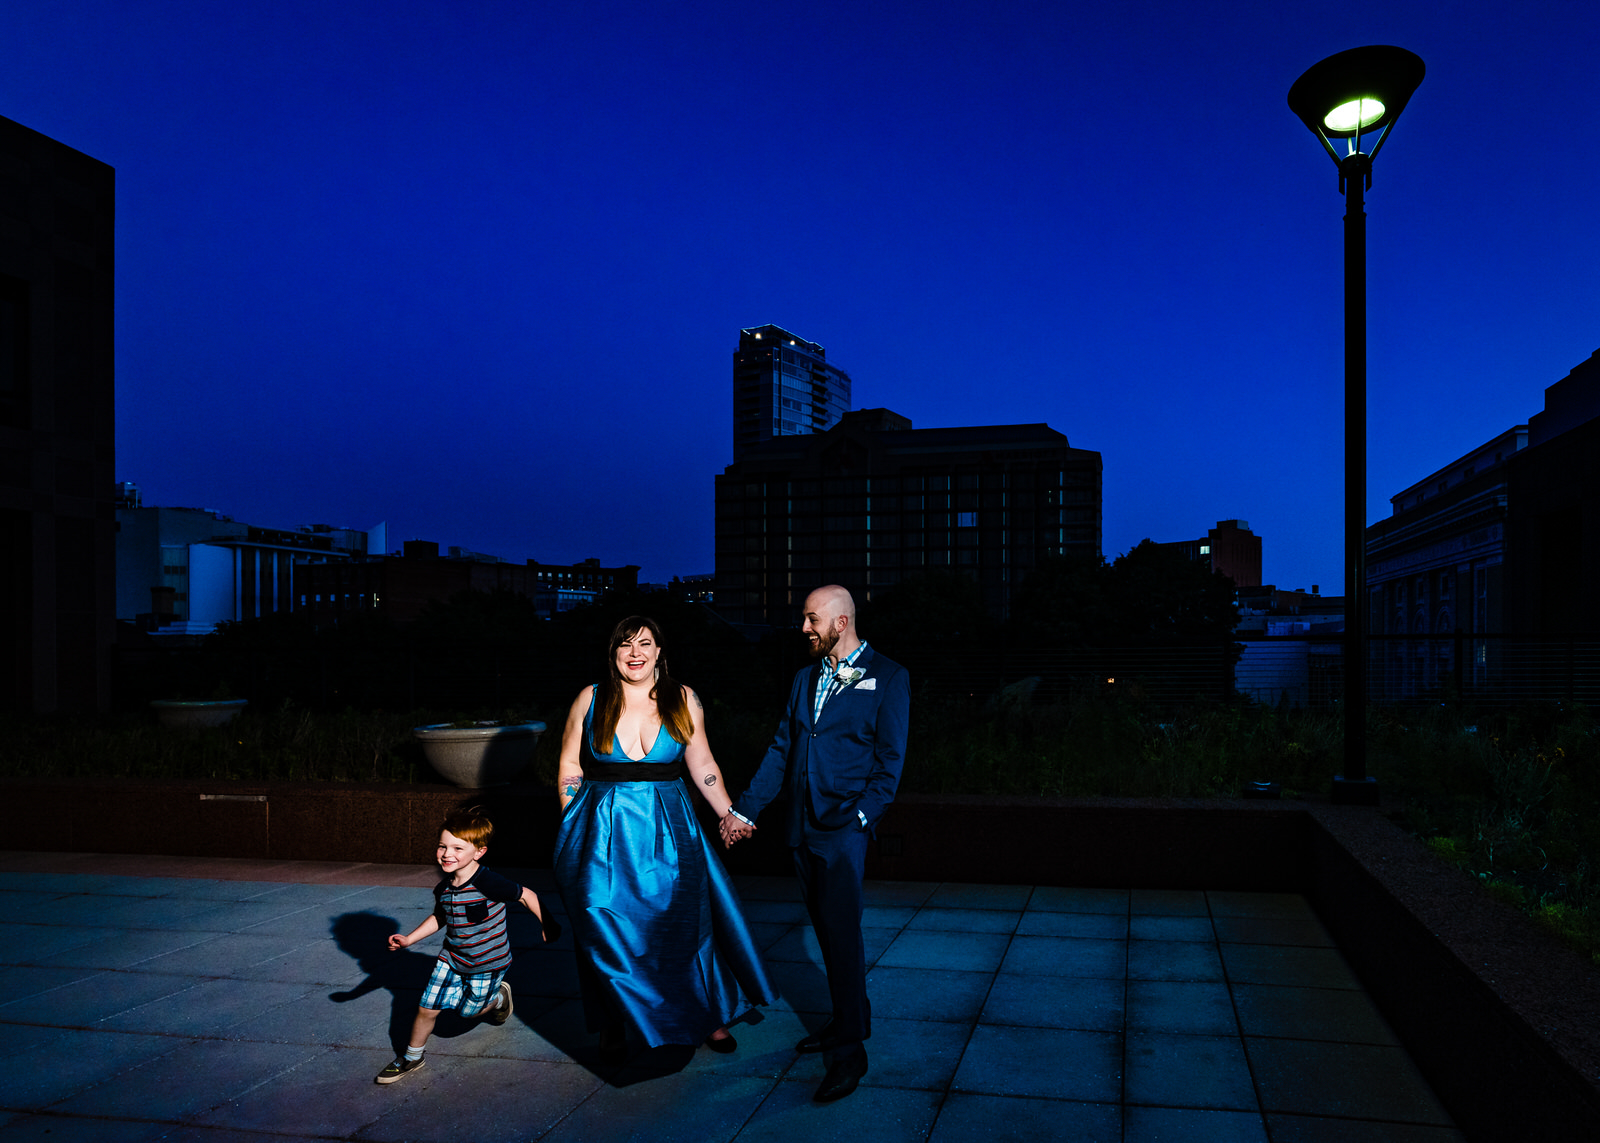 Dramatic night portrait of a husband and wife with their young son running by them